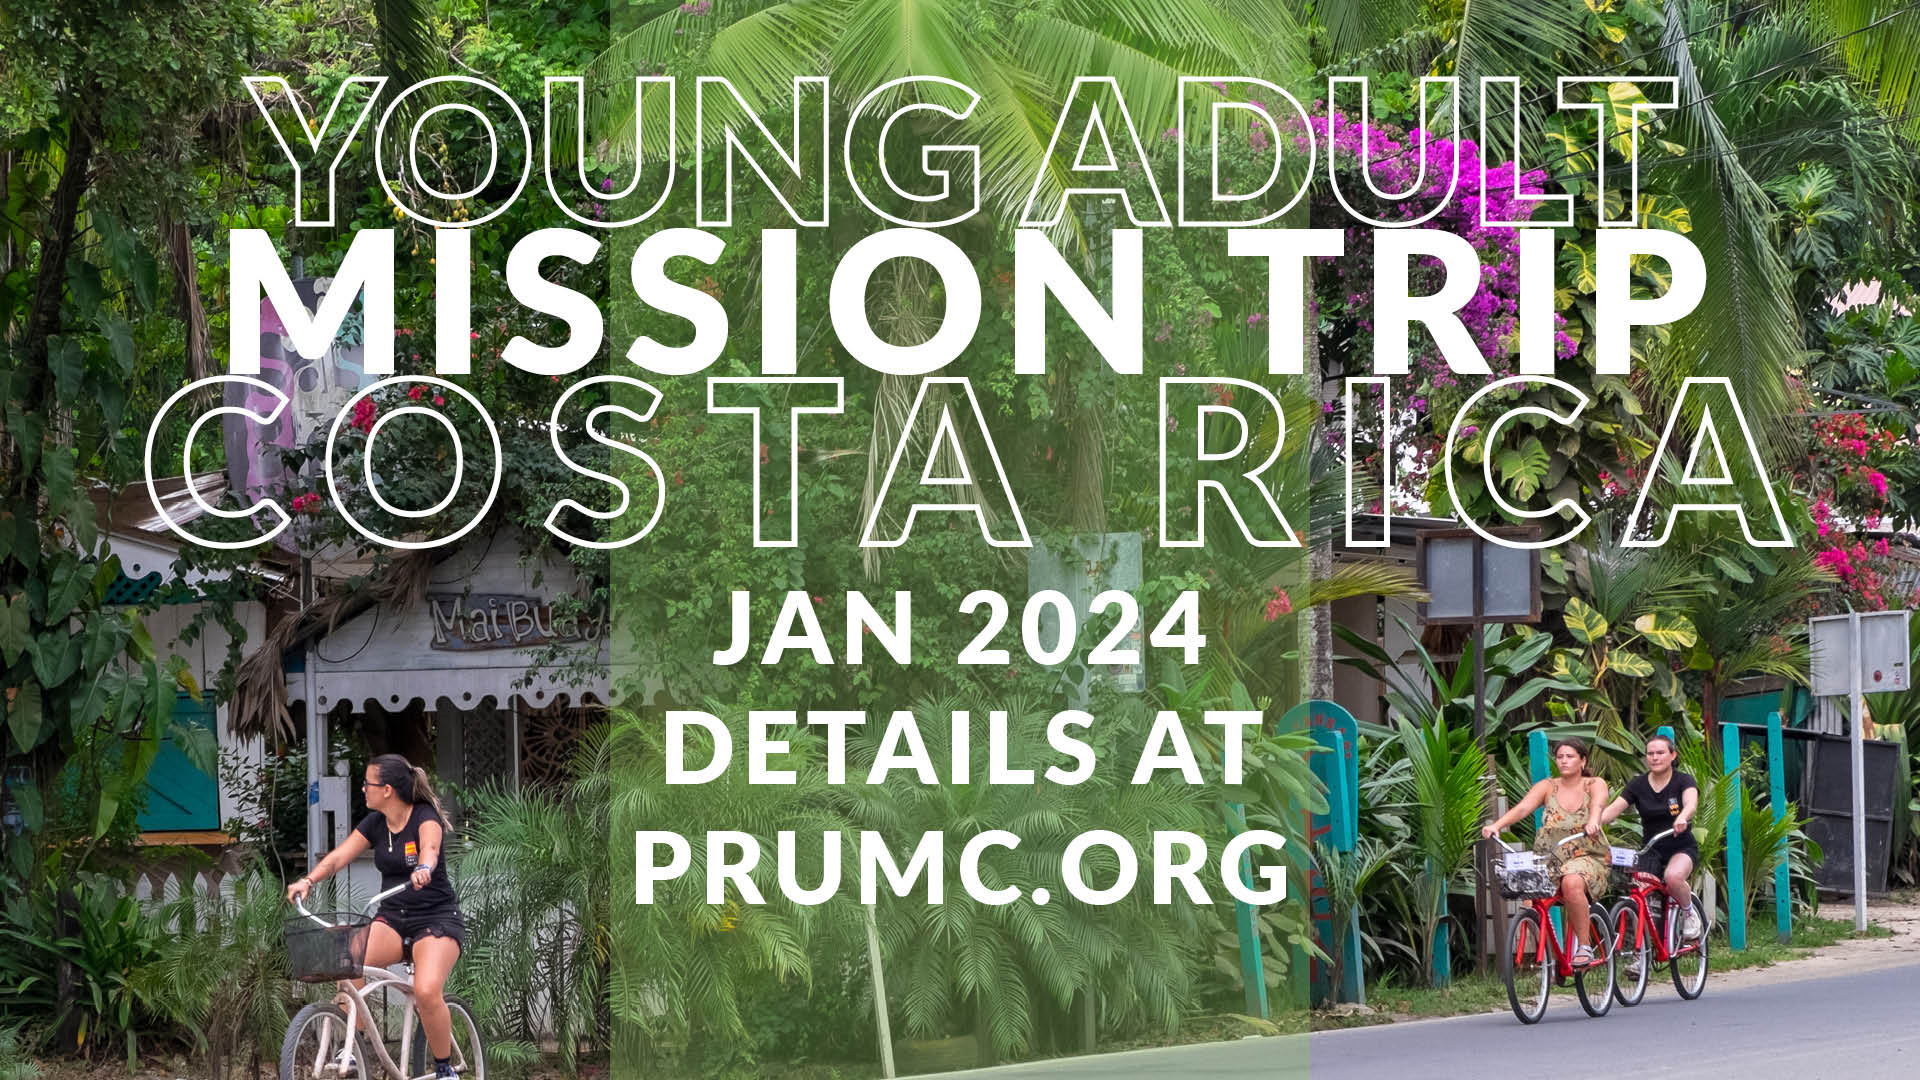 Young Adult Mission Trip to Costa Rica